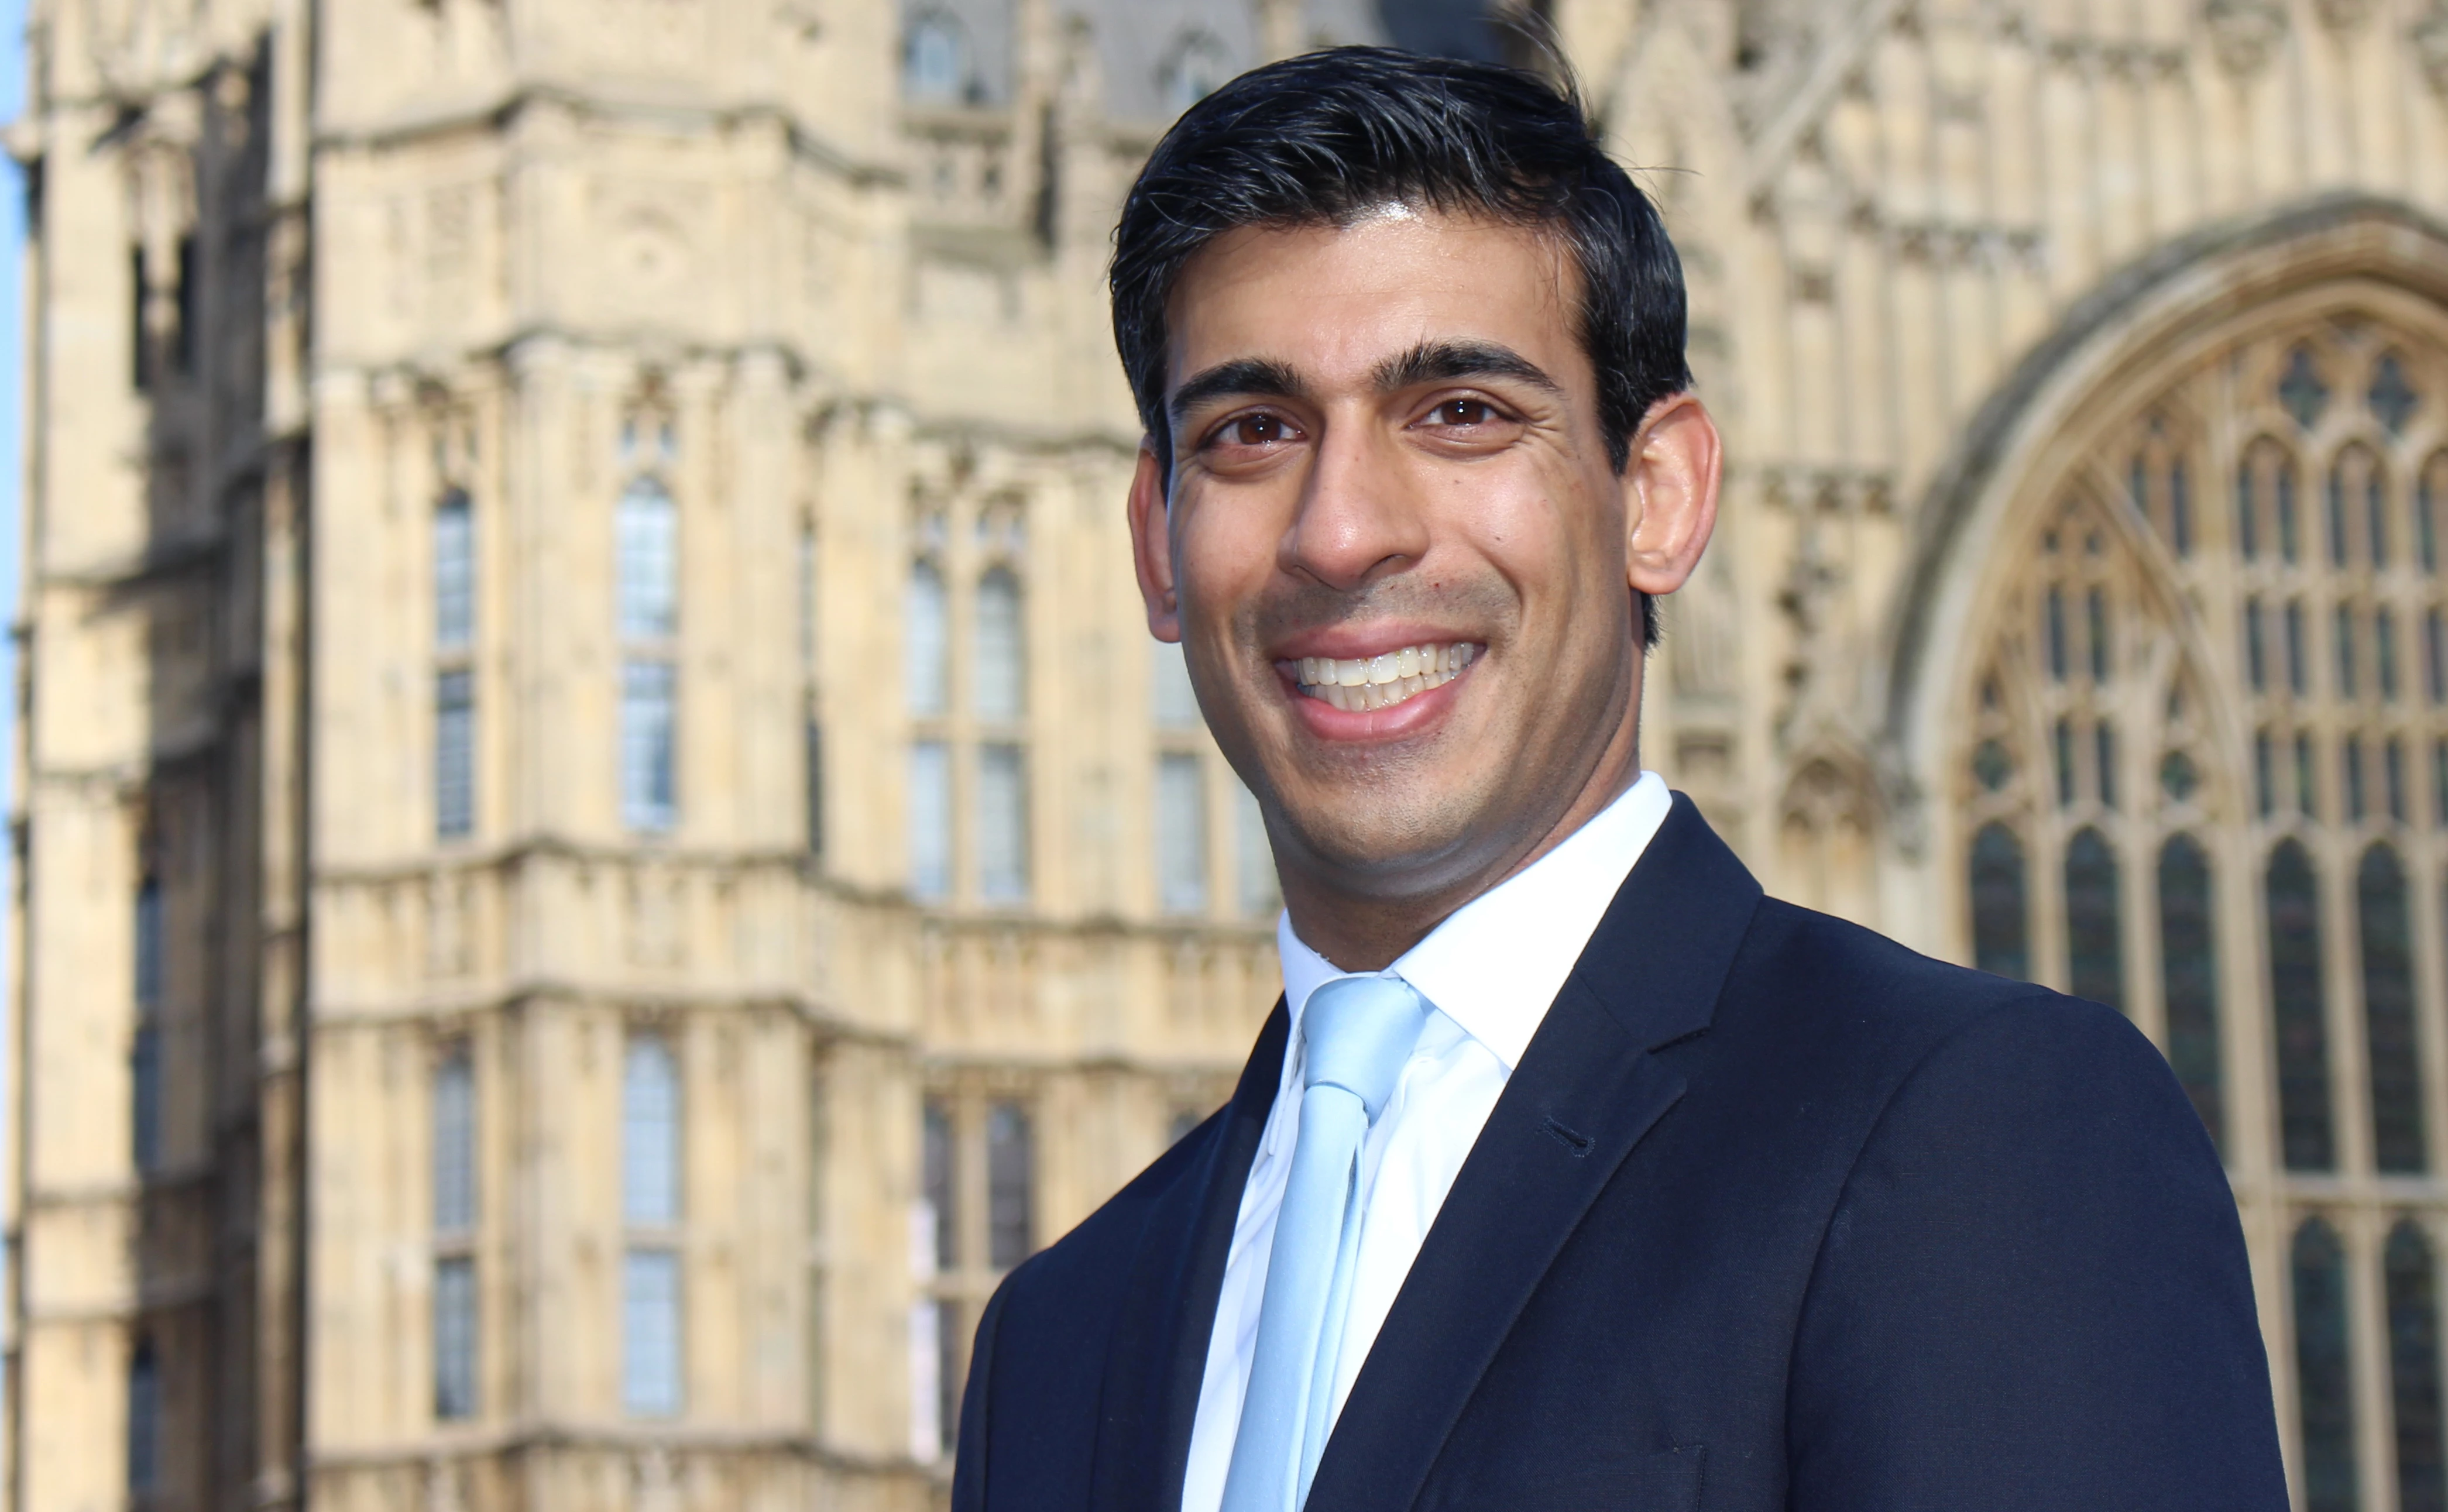 Chancellor of the Exchequer, Rishi Sunak MP.